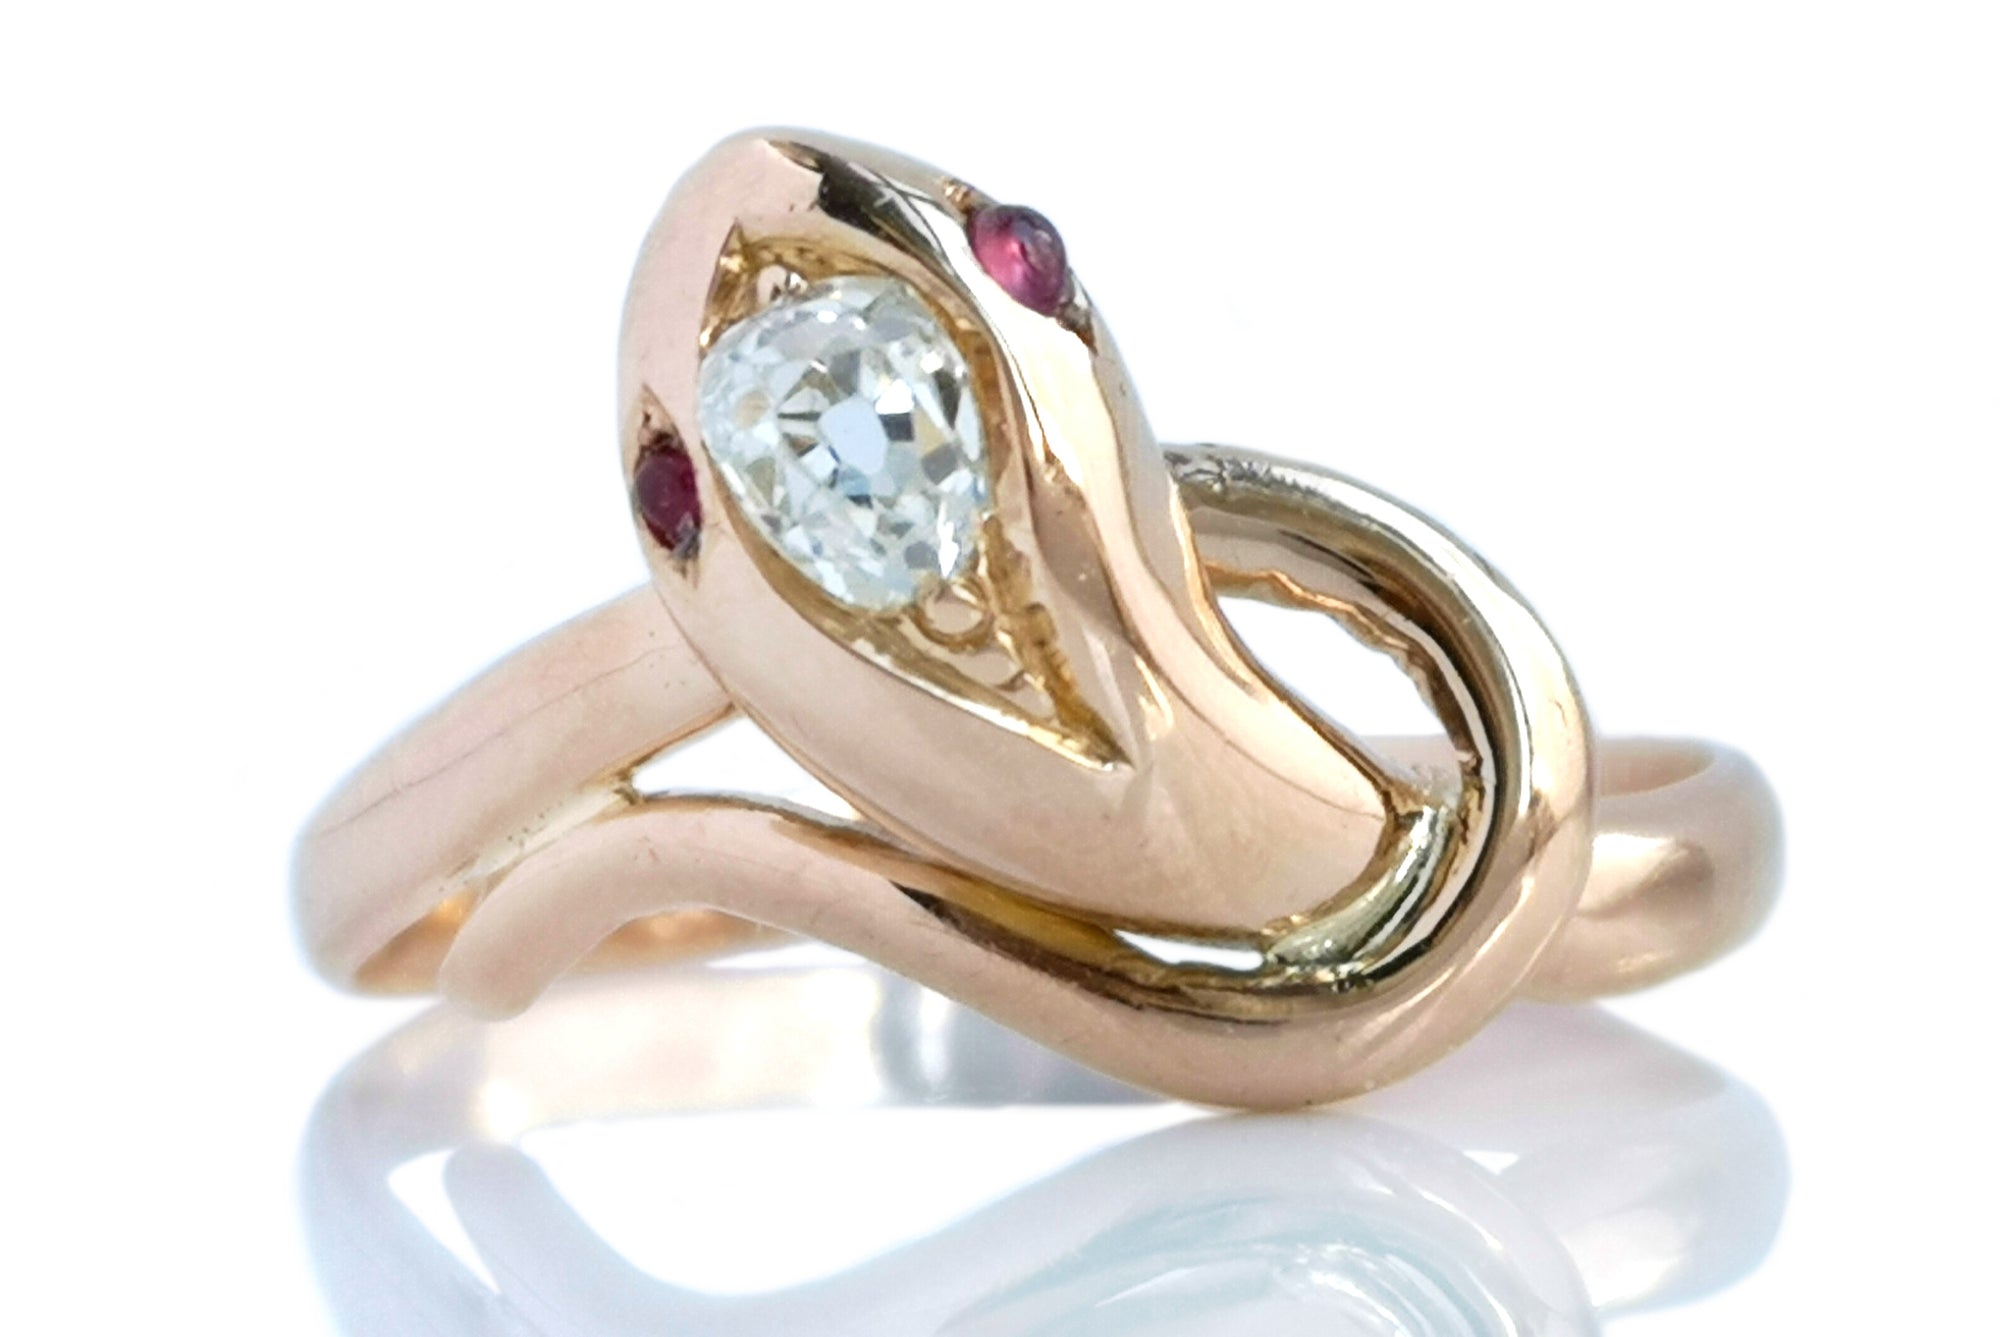 Antique French 18k Rose Gold Serpent Ring .10ct Old Mine Cut Diamond Cabochon Ruby Eyes